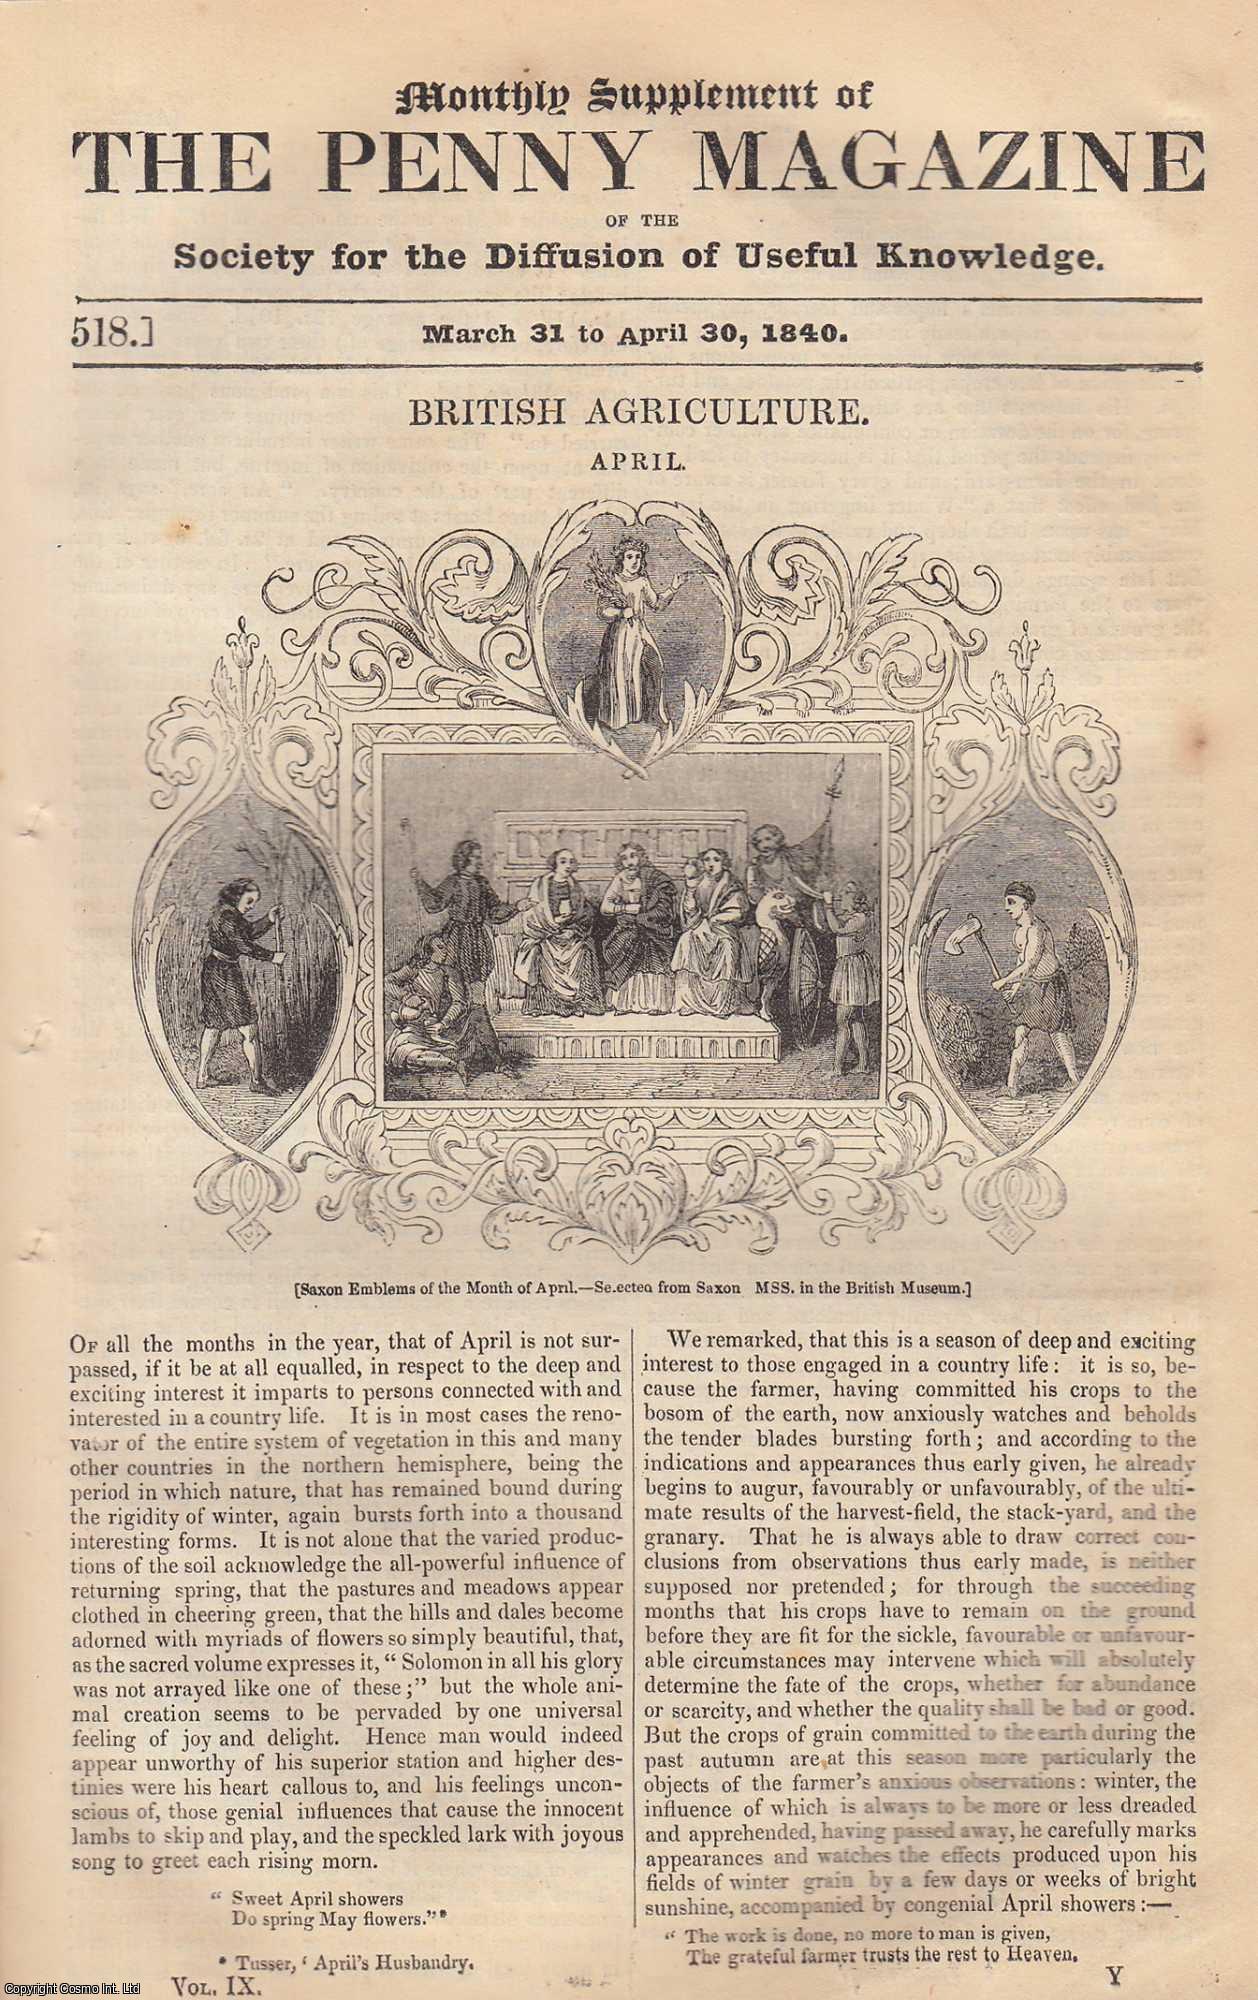 --- - British Agriculture (April). Issue No. 518, April 30th, 1840. A complete rare weekly issue of the Penny Magazine, 1840.